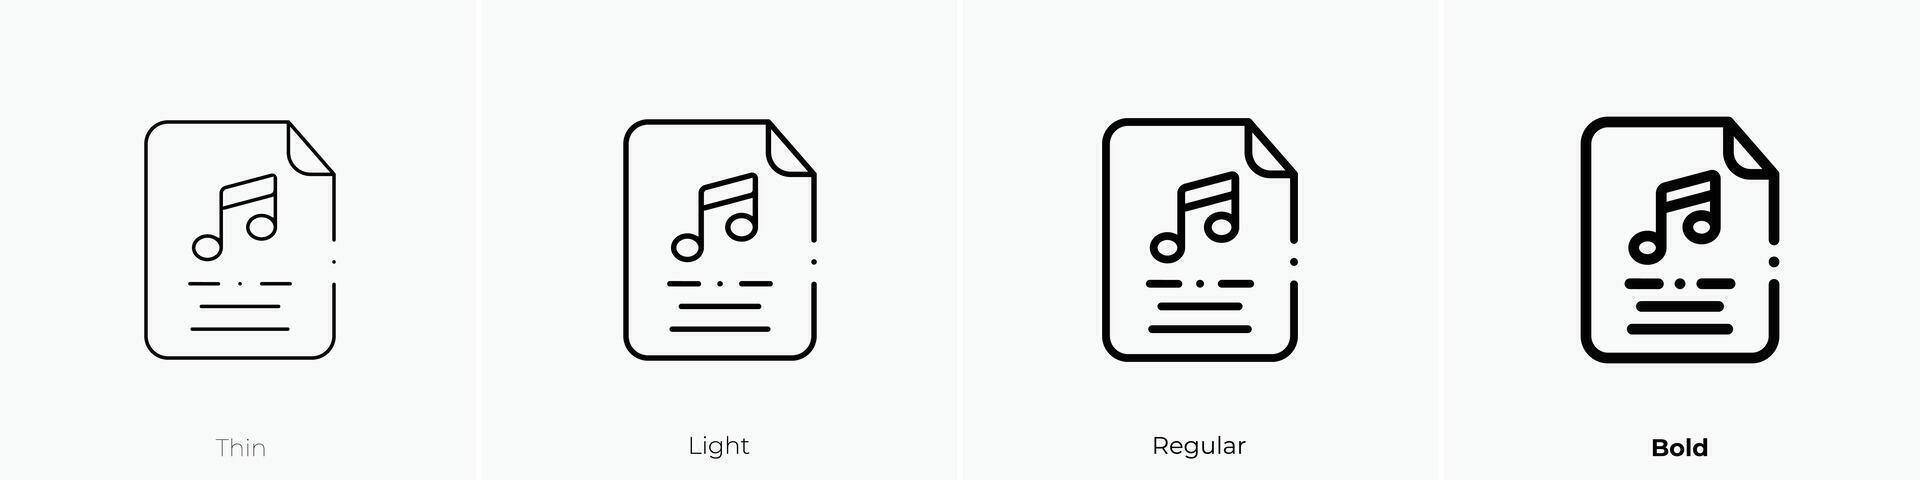 music file icon. Thin, Light, Regular And Bold style design isolated on white background vector